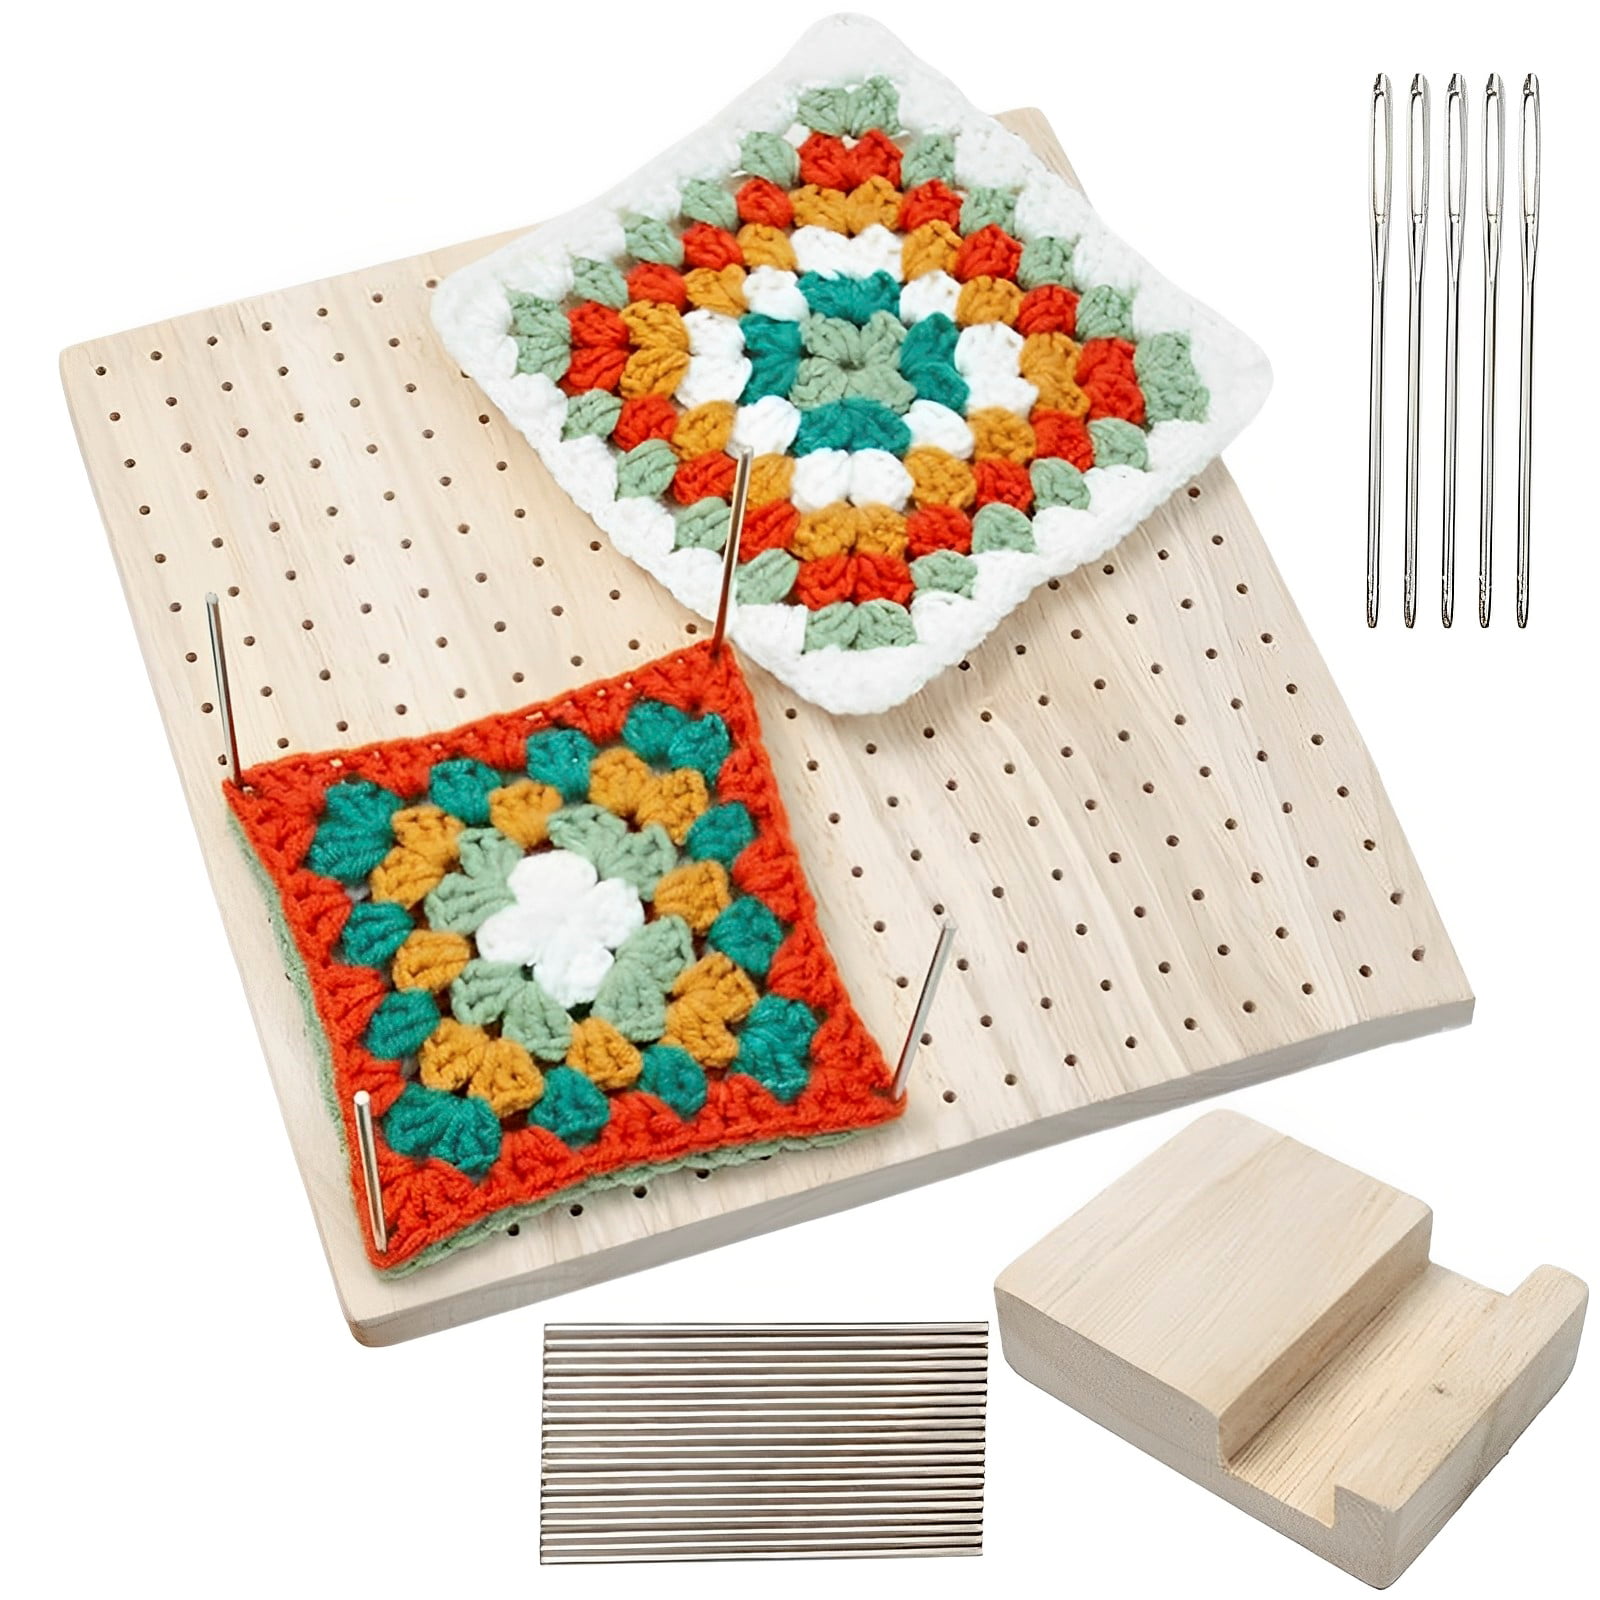 Nyidpsz Wooden Crochet Blocking Board Handcrafted Knitting Blocking Mat Set  with 20 Stainless Steel Pins 5 Large Eye Needle and Stand for Knitting  Crochet Needlework 